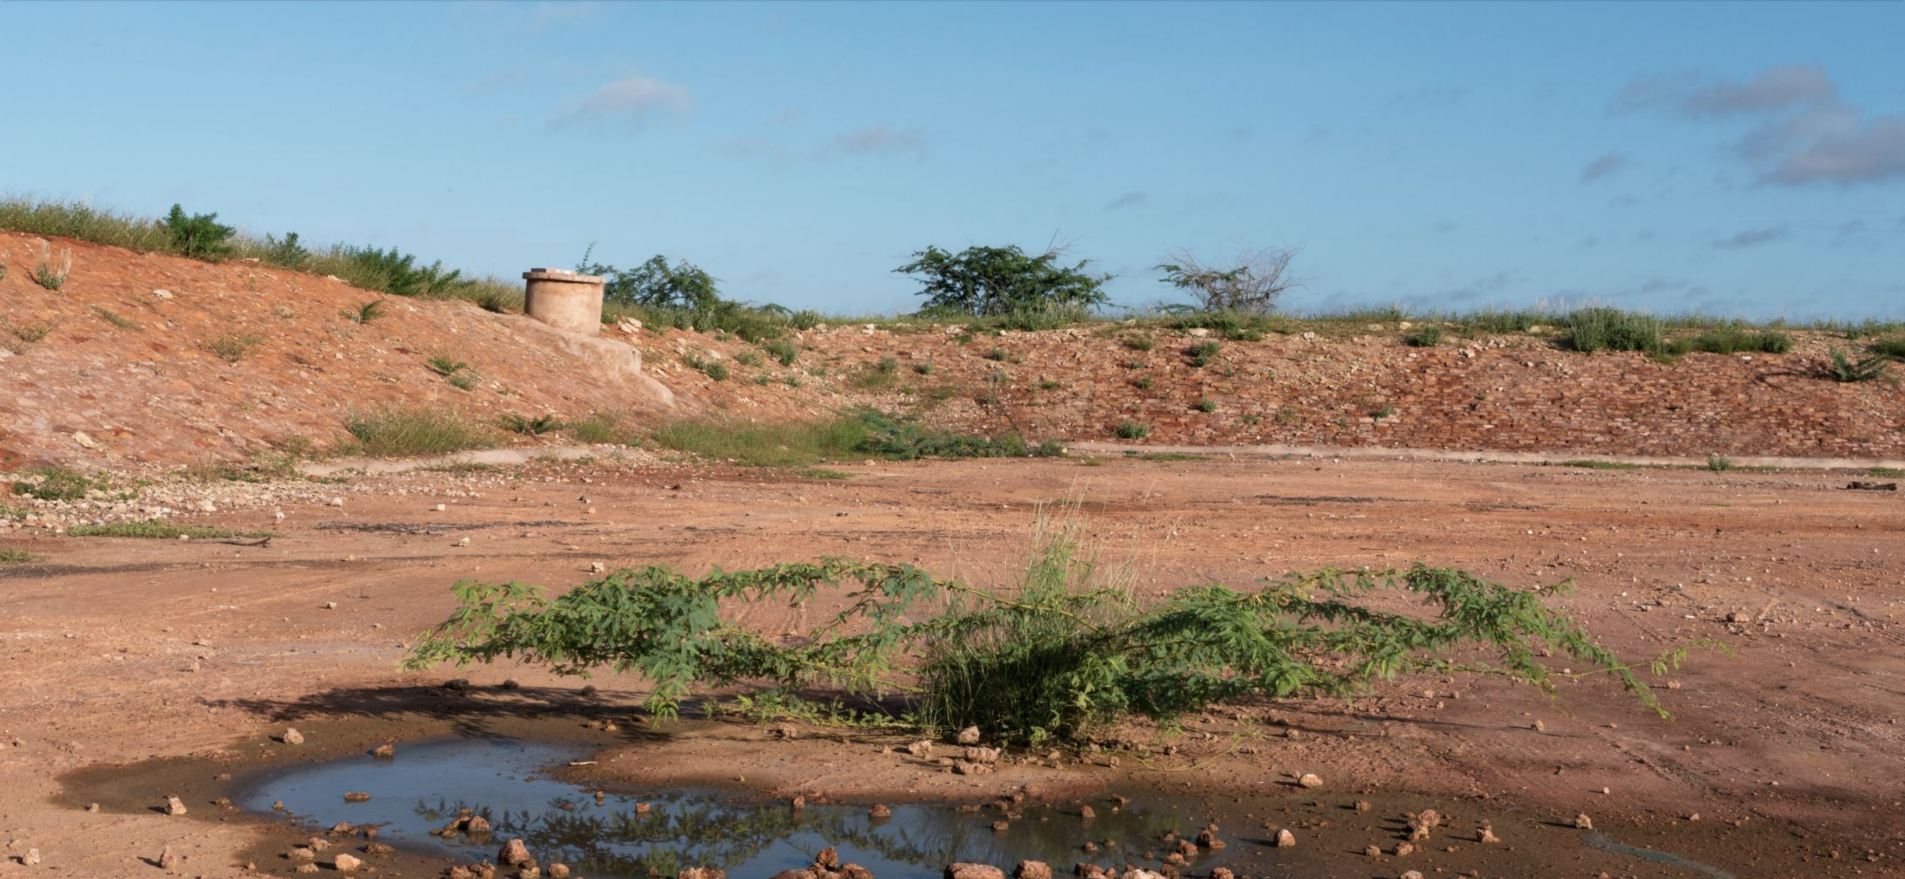 The site of a massive, incomplete sewage project in Wajir. The project, financed by the Ministry of State for Development of Northern Kenya and Other Arid Regions, started and stalled in the early 2000s. It was reported several times to the What Went Wrong? survey. Image by Peter DiCampo. Kenya, 2018.